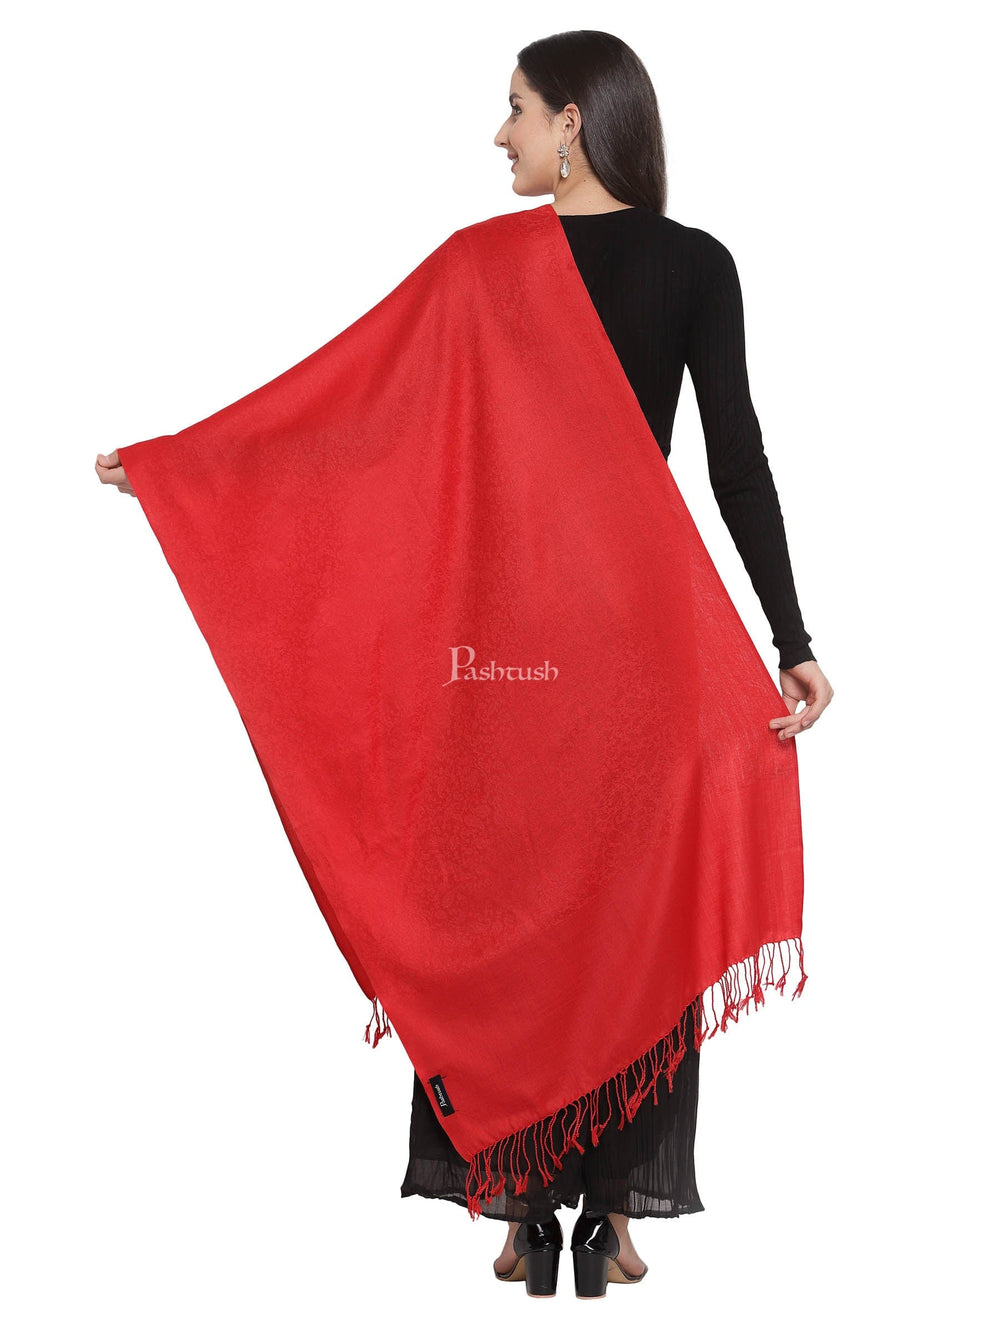 Pashtush India Womens Stoles and Scarves Scarf Pashtush Womens Extra Fine Wool Scarf, Stole, Scarlet Red (Solid Colour)